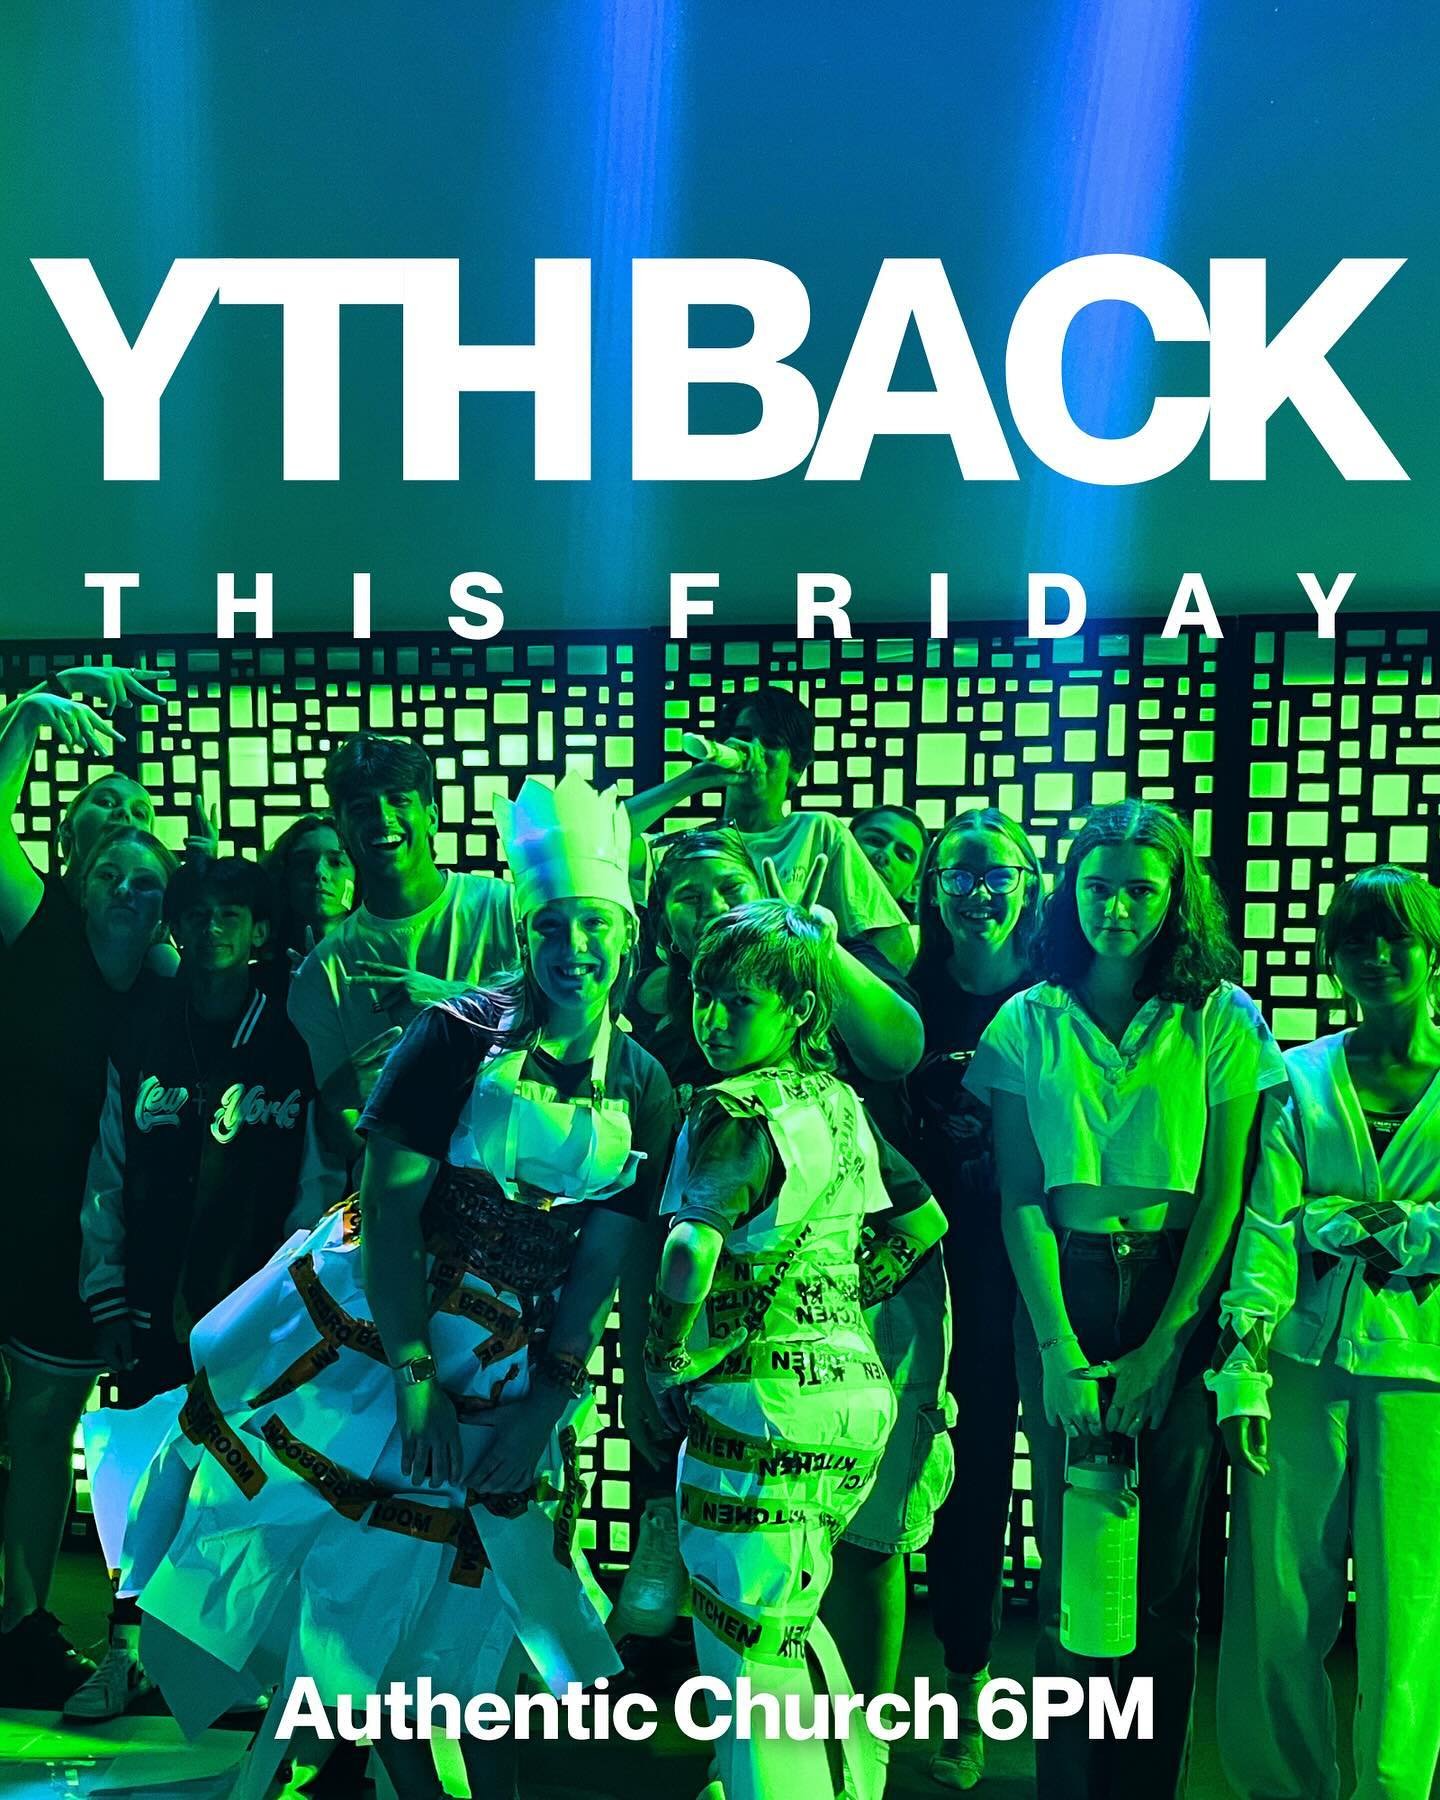 YTH BACK, TELL EVERYONE 🗣️ 
-
We are back for Term 2 from this Friday, and it&rsquo;s gonna be unreal 🔥 Term calendar coming soon, stay tuned for more info&hellip; 🤝

FOOD
HANGS
BIBLE
MUSIC

We&rsquo;ll see you on Friday